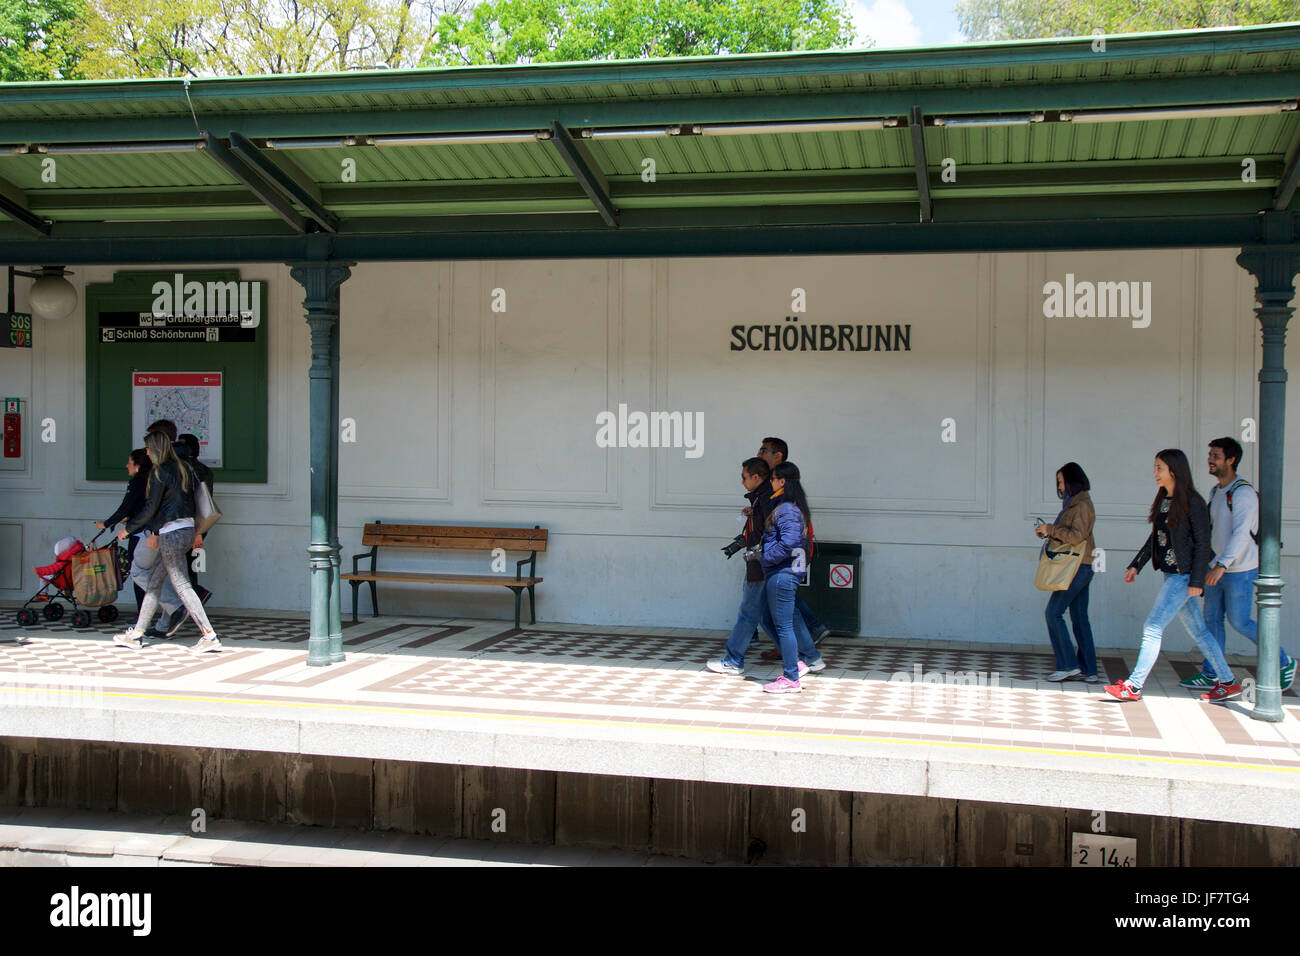 VIENNA, AUSTRIA - APR 30th, 2017: Passengers walking and waiting for a train at the subway or tram station Schonbrunn Palace Stock Photo